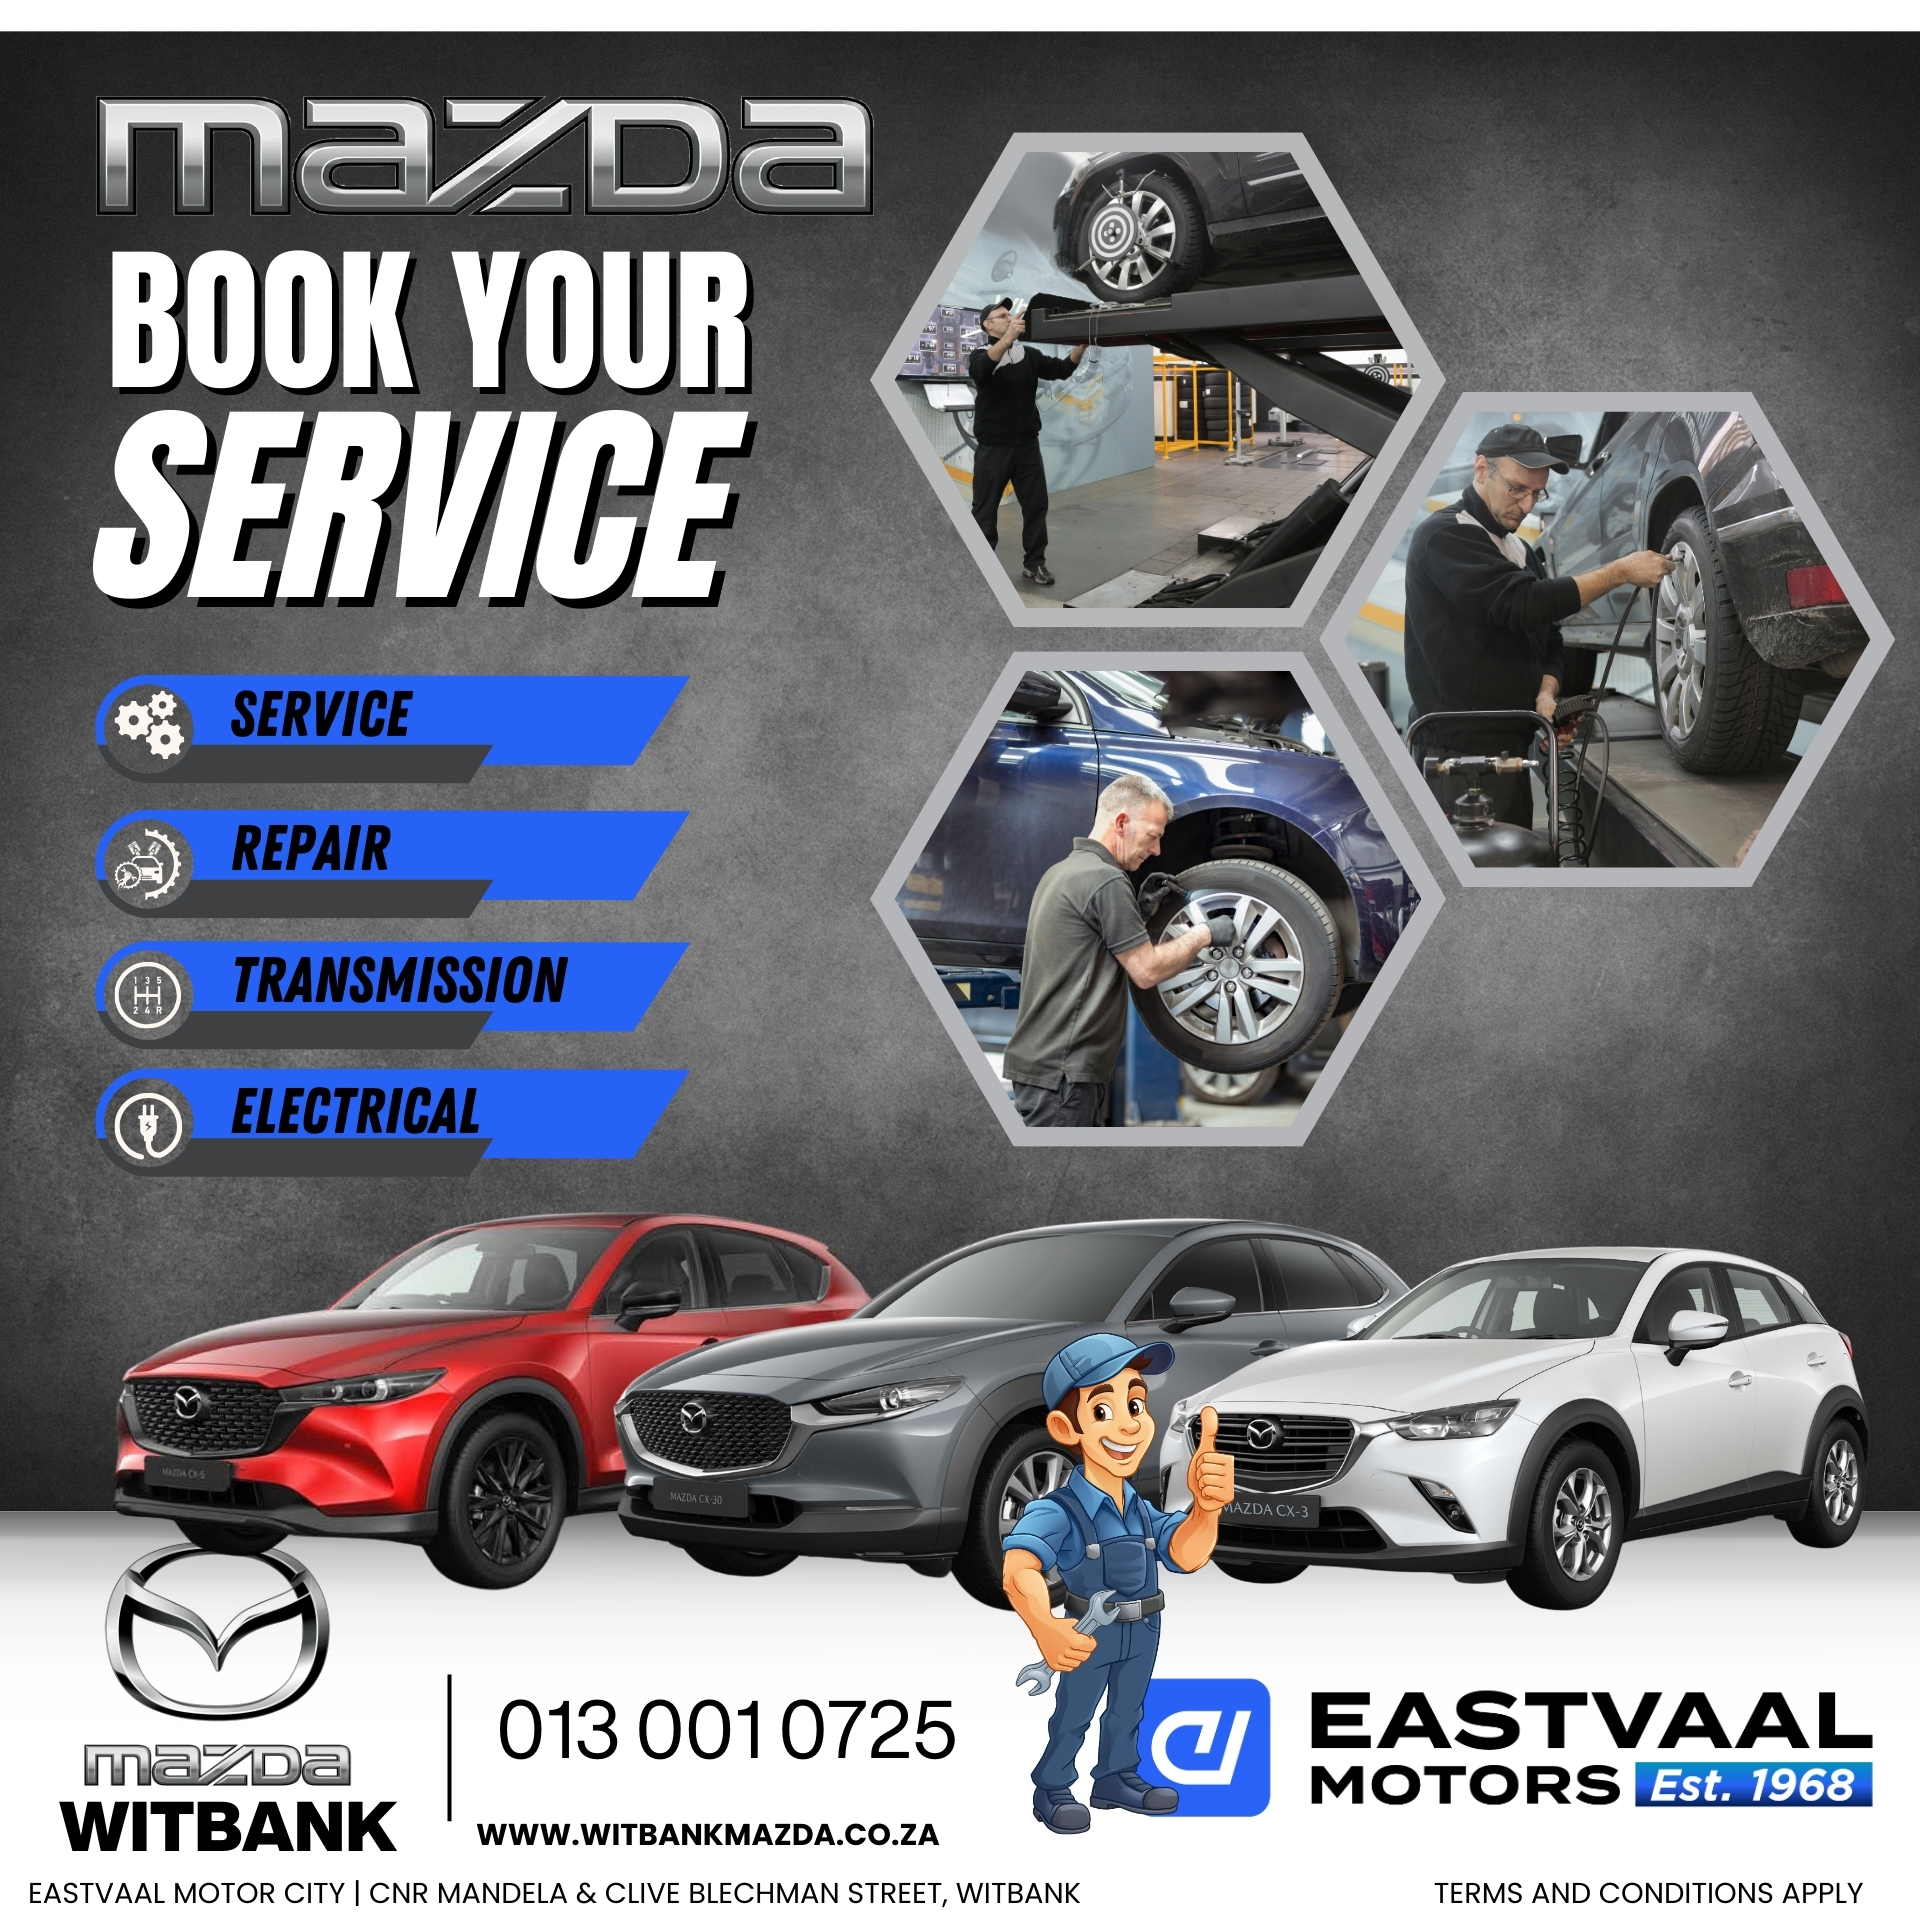 Give your car the care it deserves. Book your service now at Eastvaal Motor City! image from 